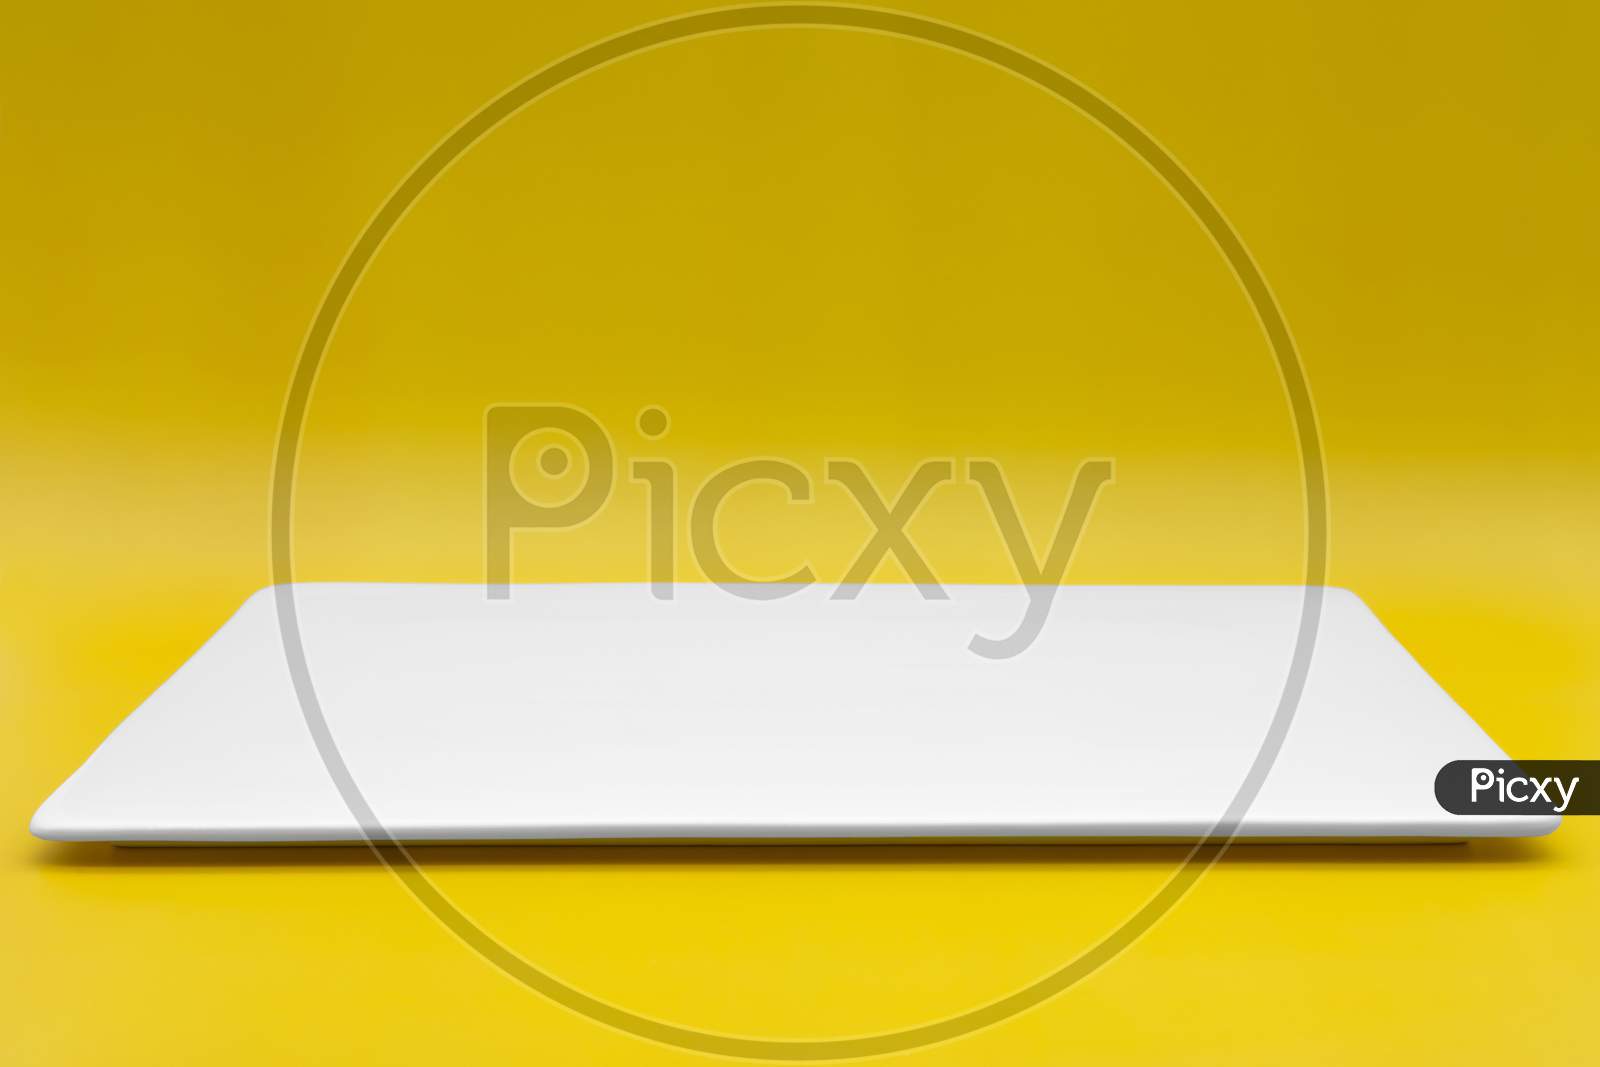 A Rectangle Empty White Plate Isolated On The Yellow Background.